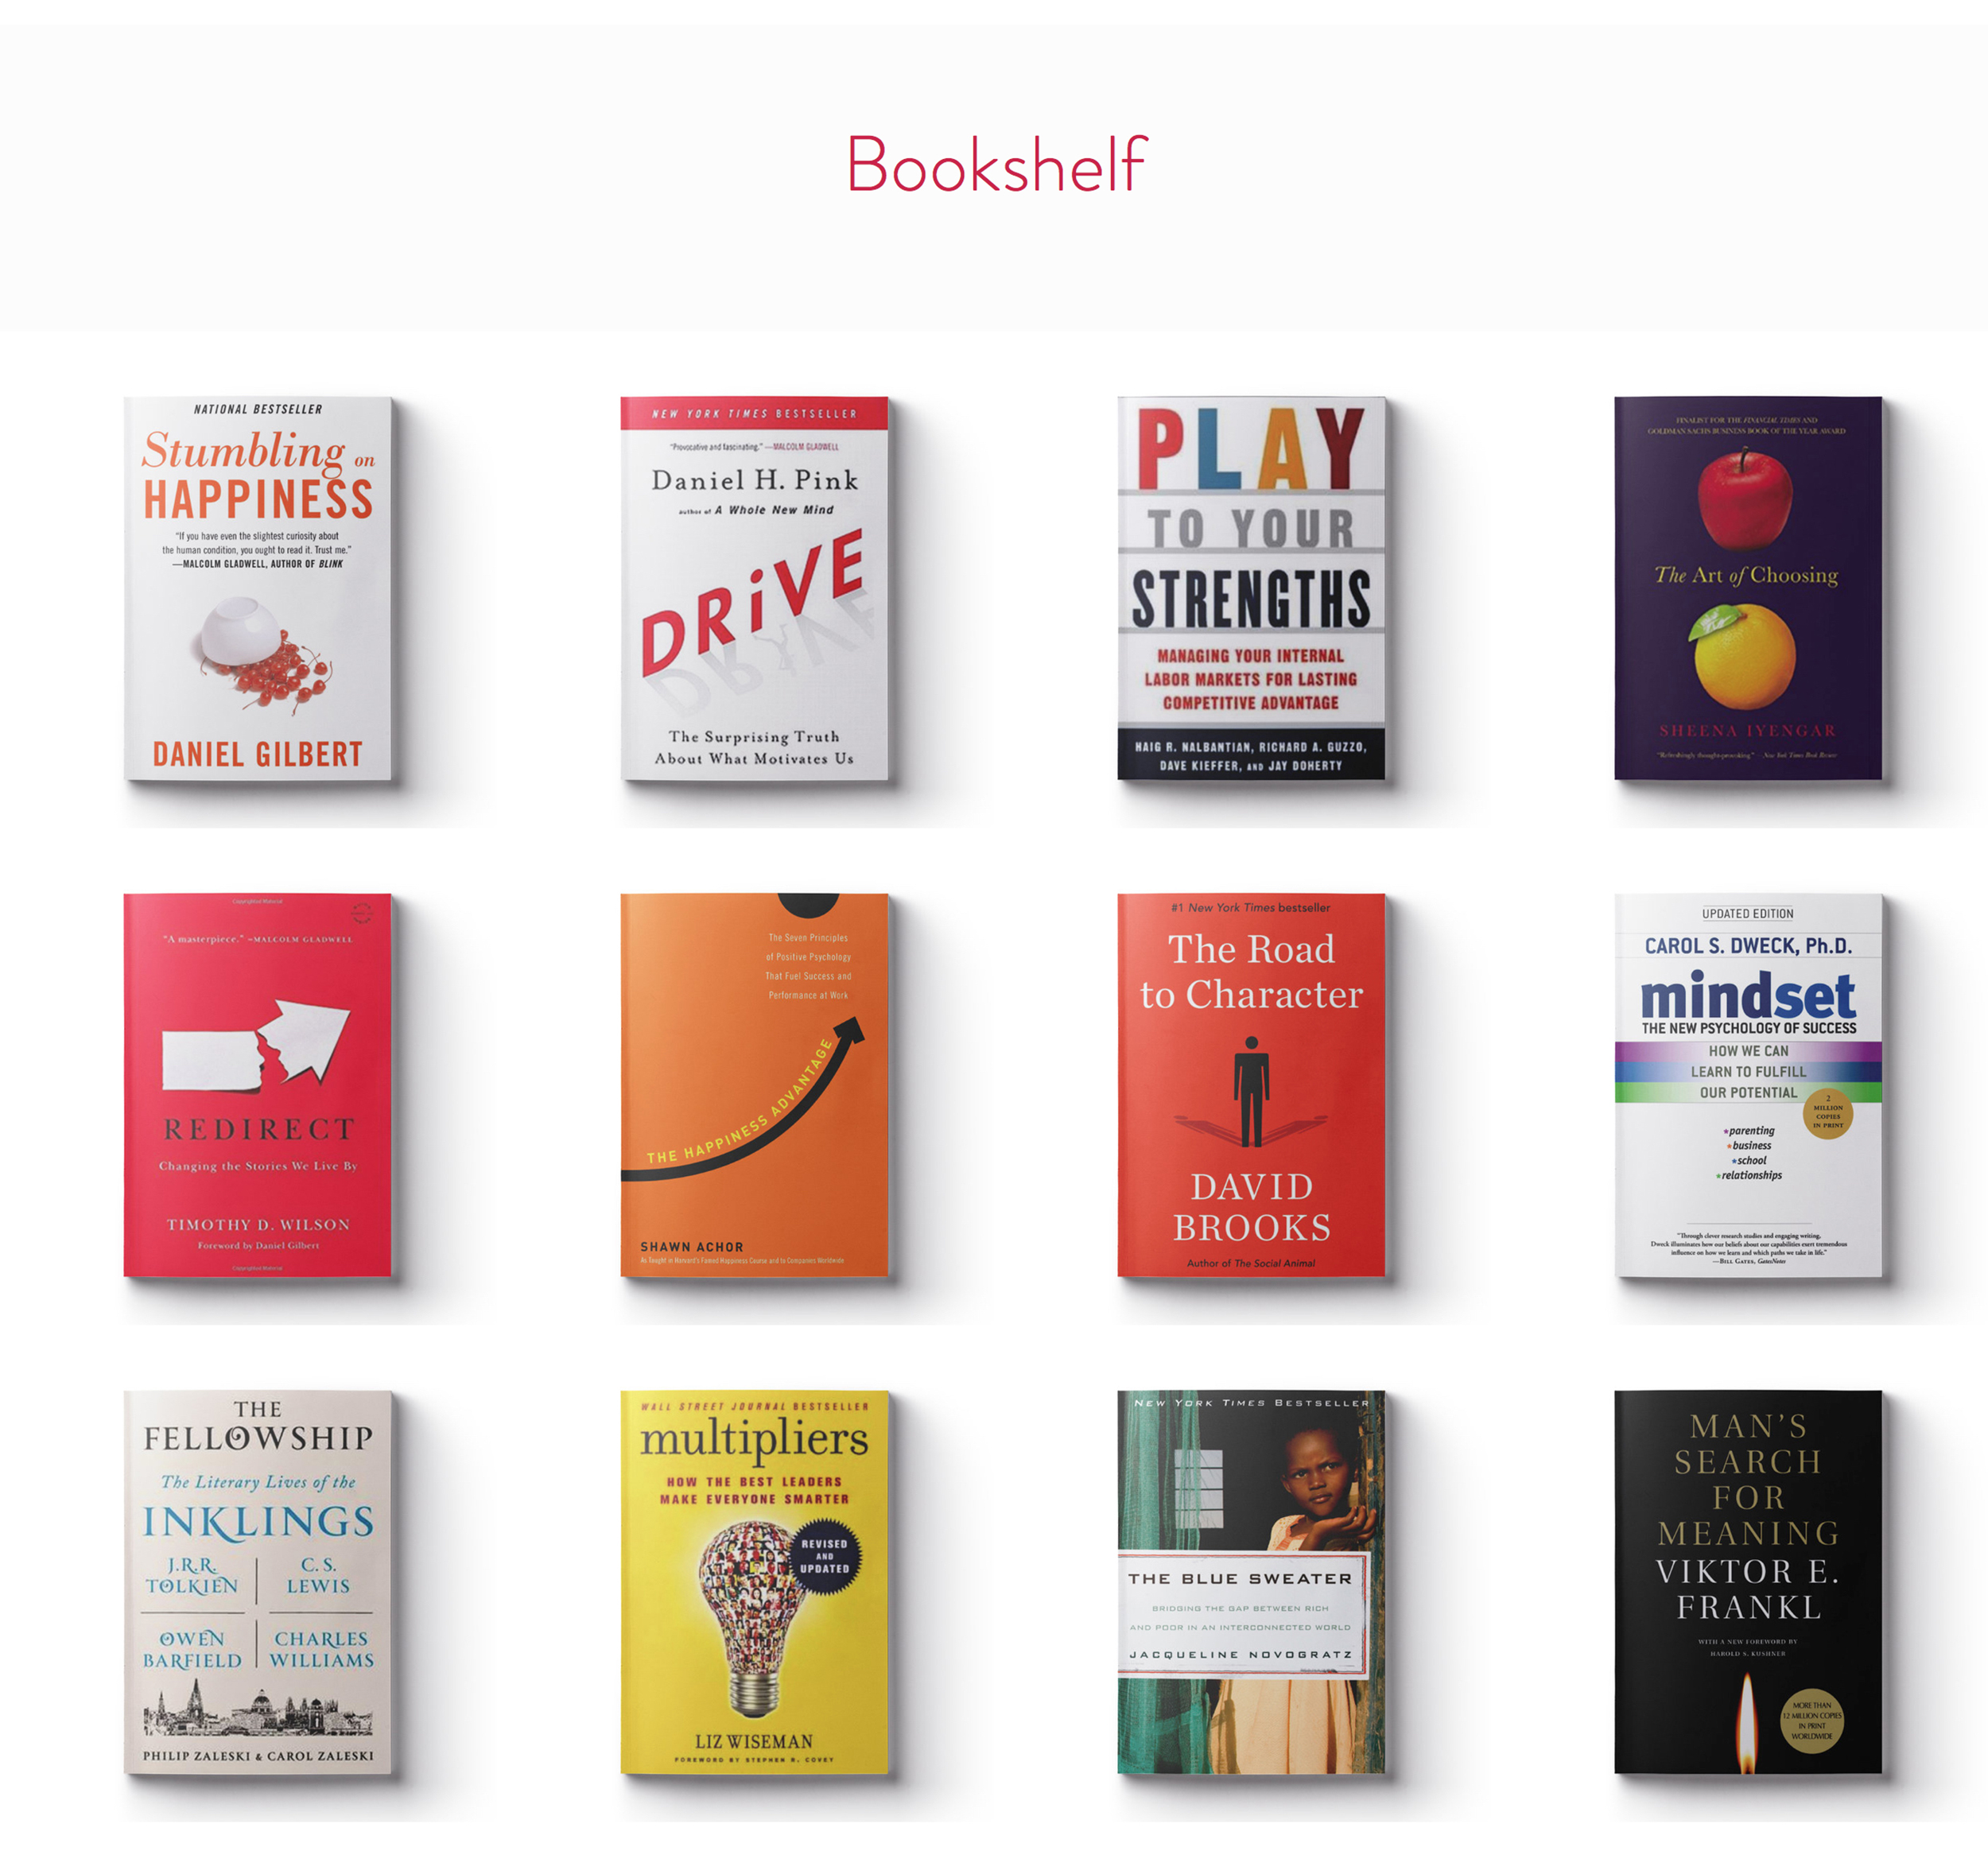 The 'Bookshelf' Page featuring a title, and 12 books on entrepreneurship